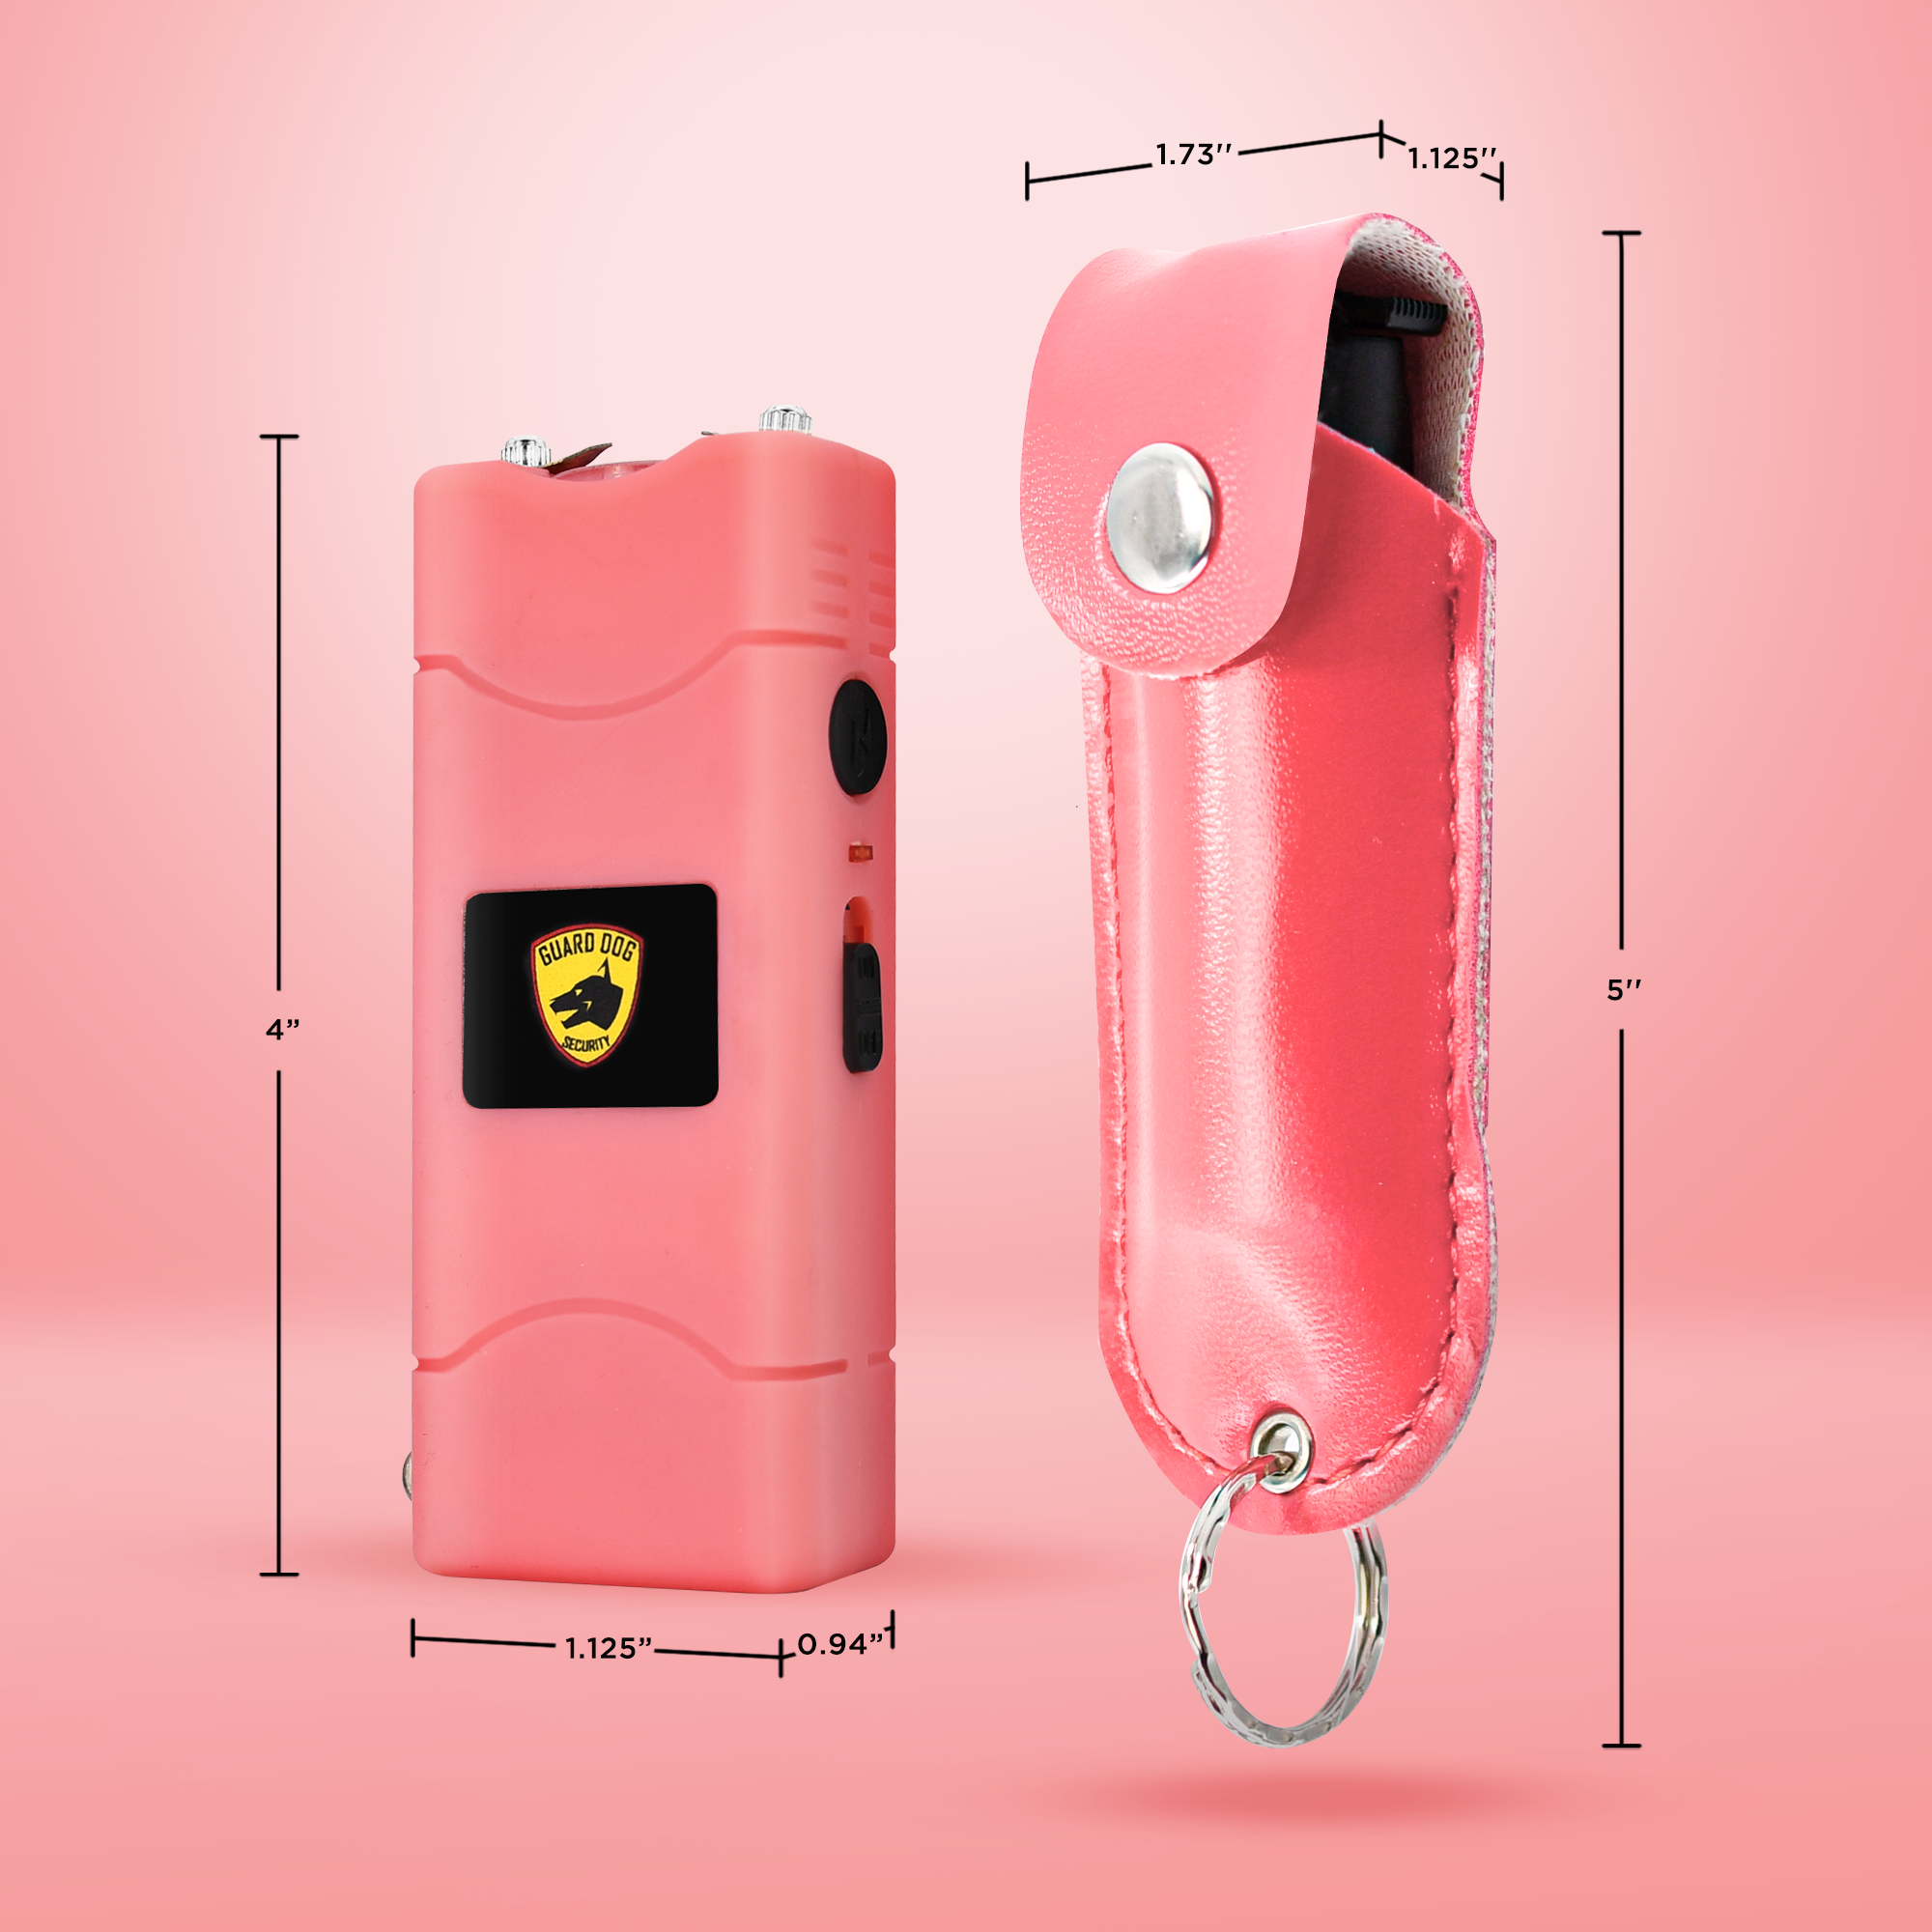 Pepper Spray vs. Taser: What is the Best for Self-Defense? – Guard Dog  Security